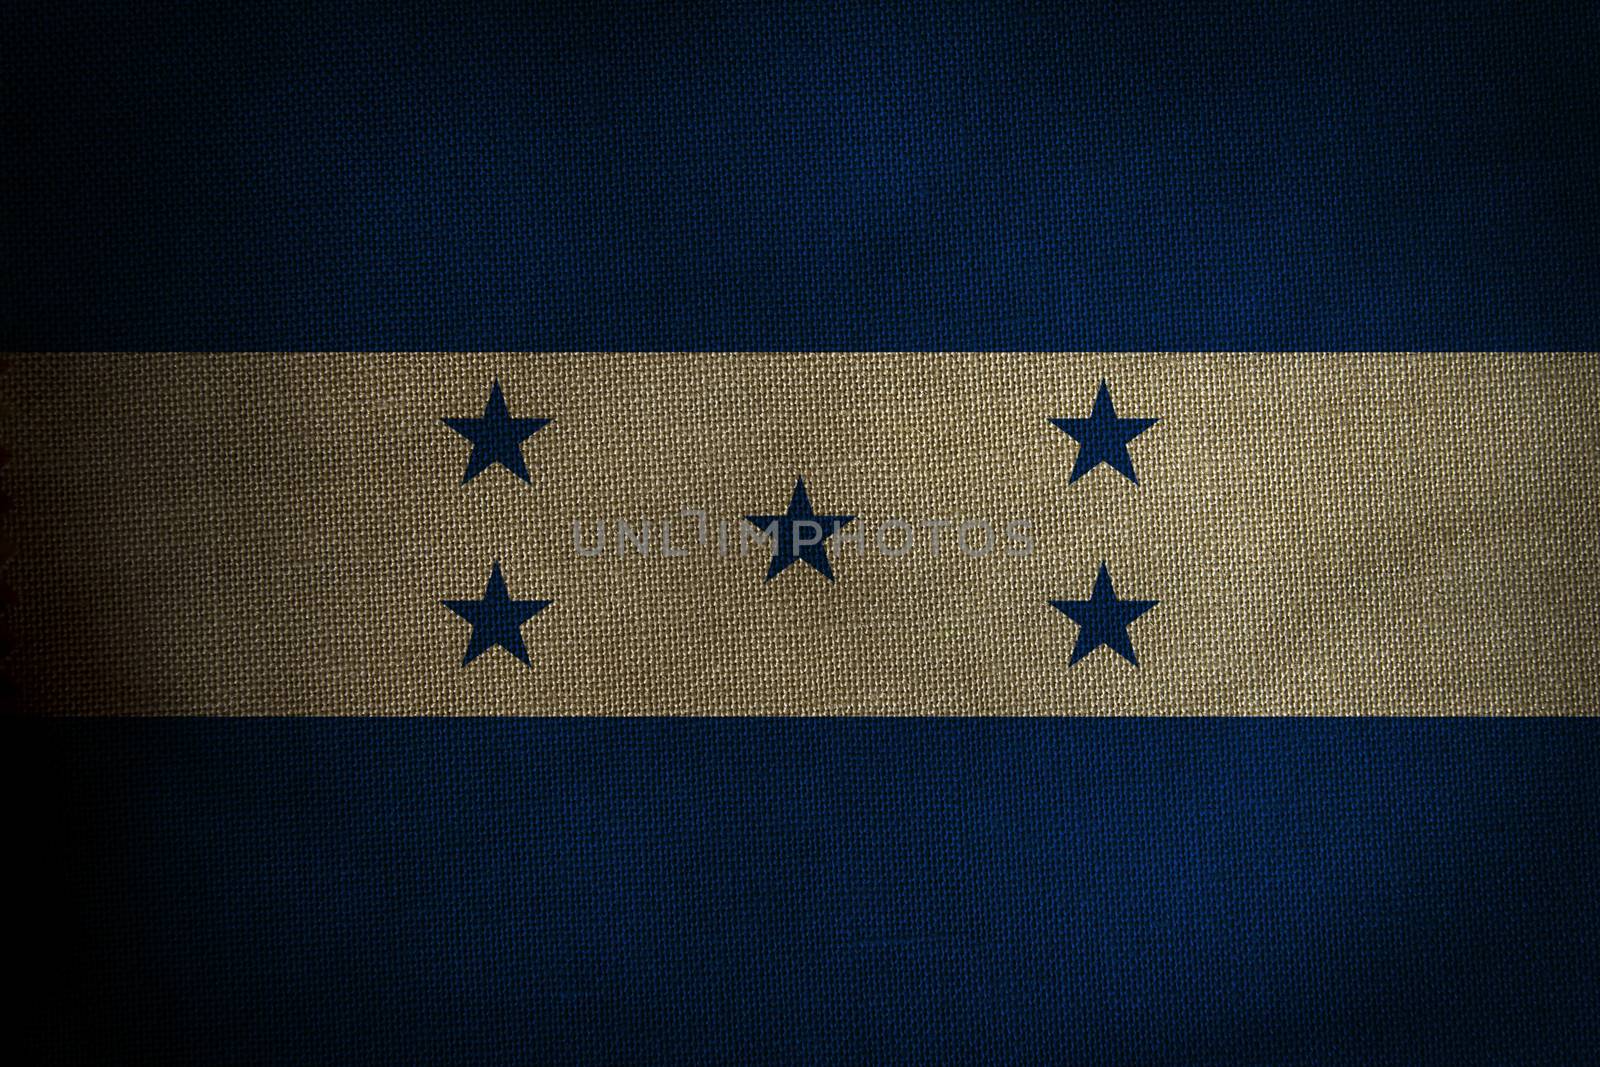 The central part of the flag of the state of Honduras